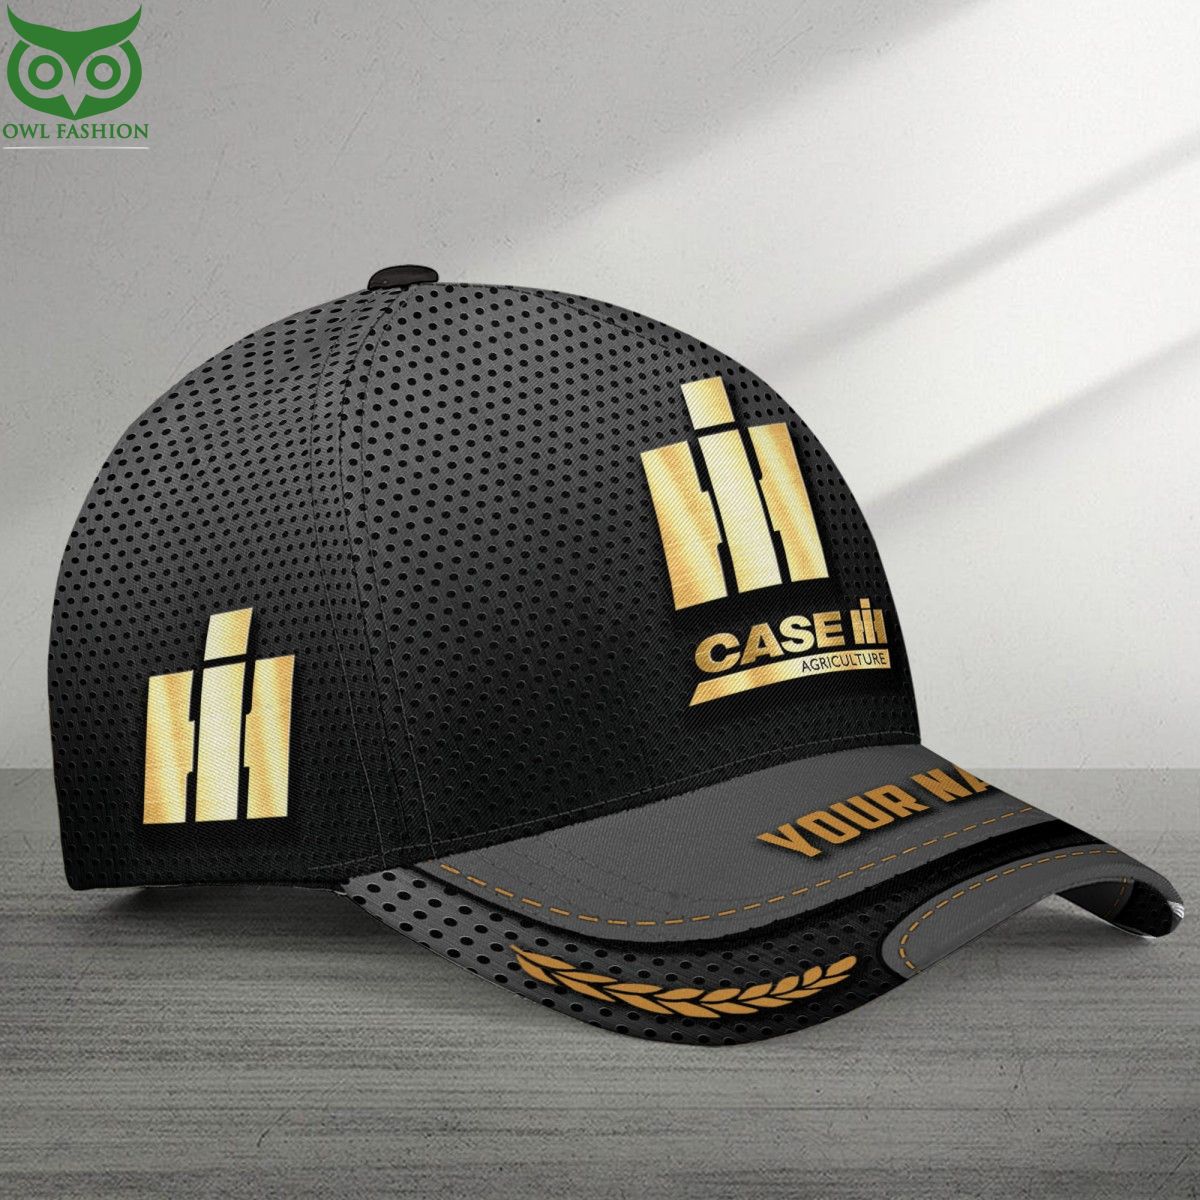 Case IH Luxury Logo Brand Personalized Classic Cap Natural and awesome